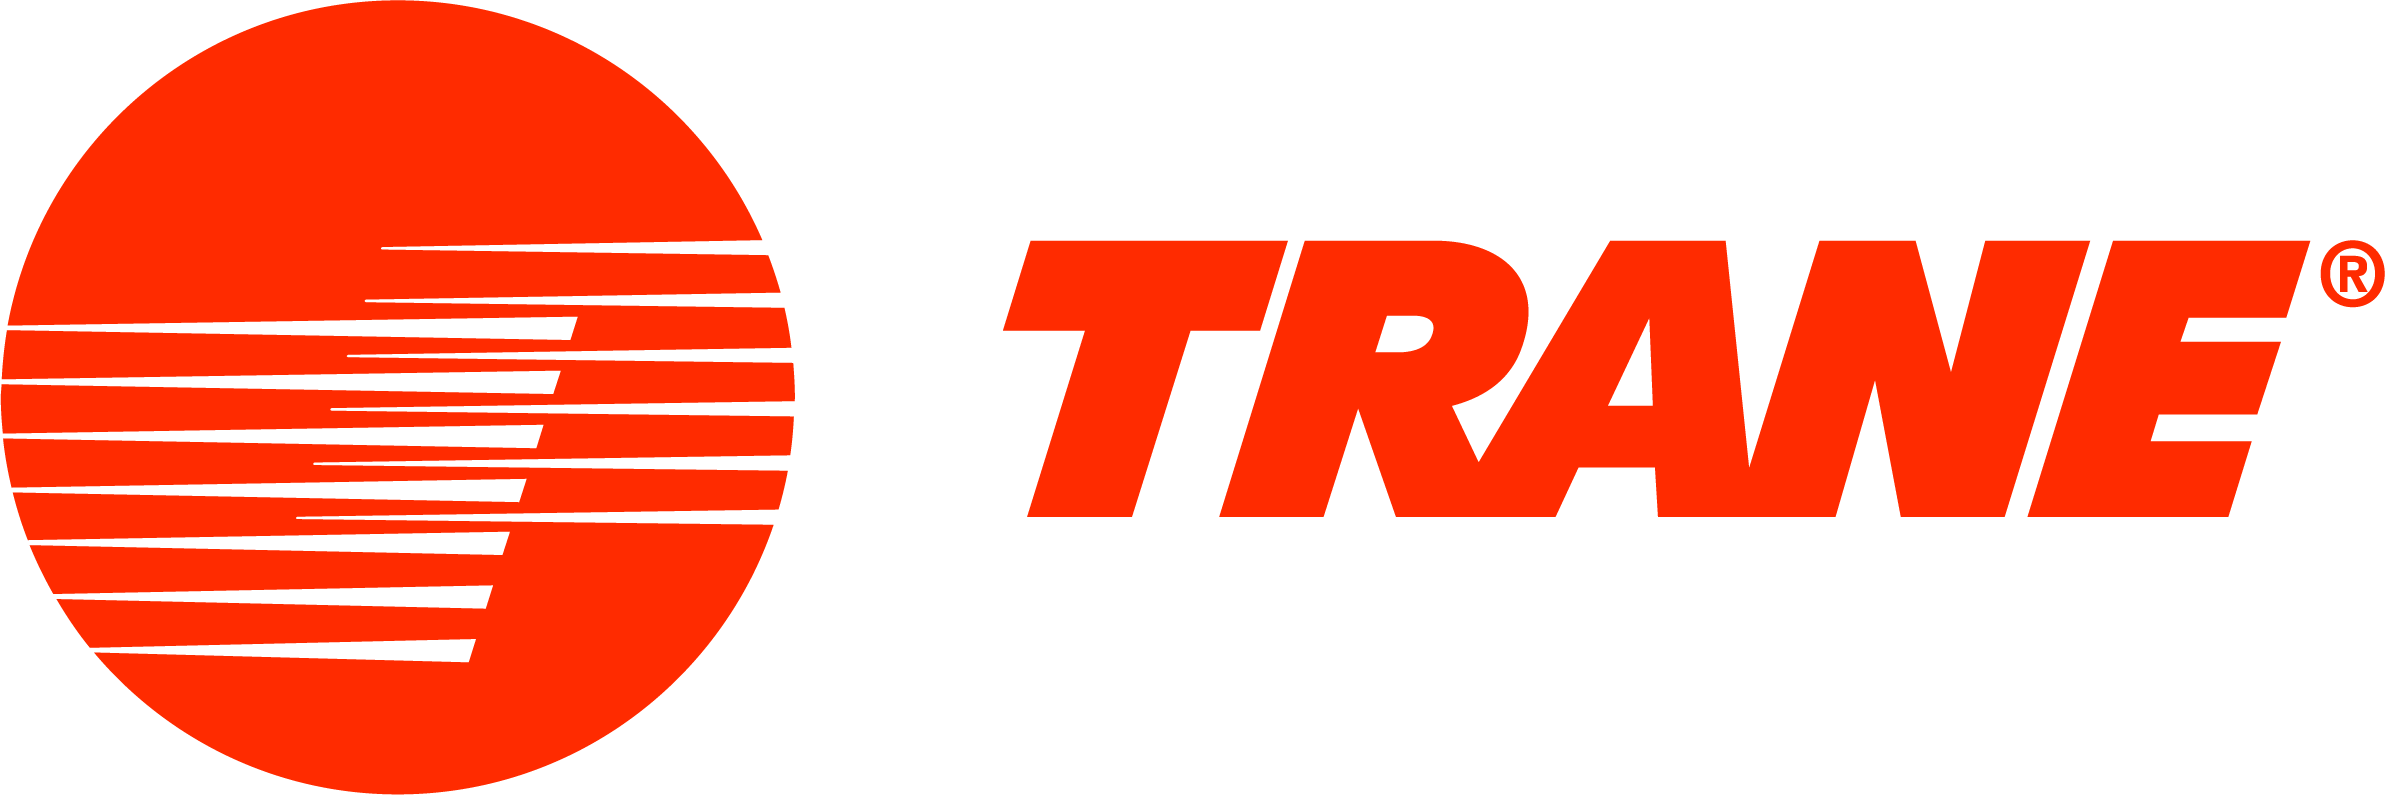 Trane logo featuring the word 'Trane' in bold letters.